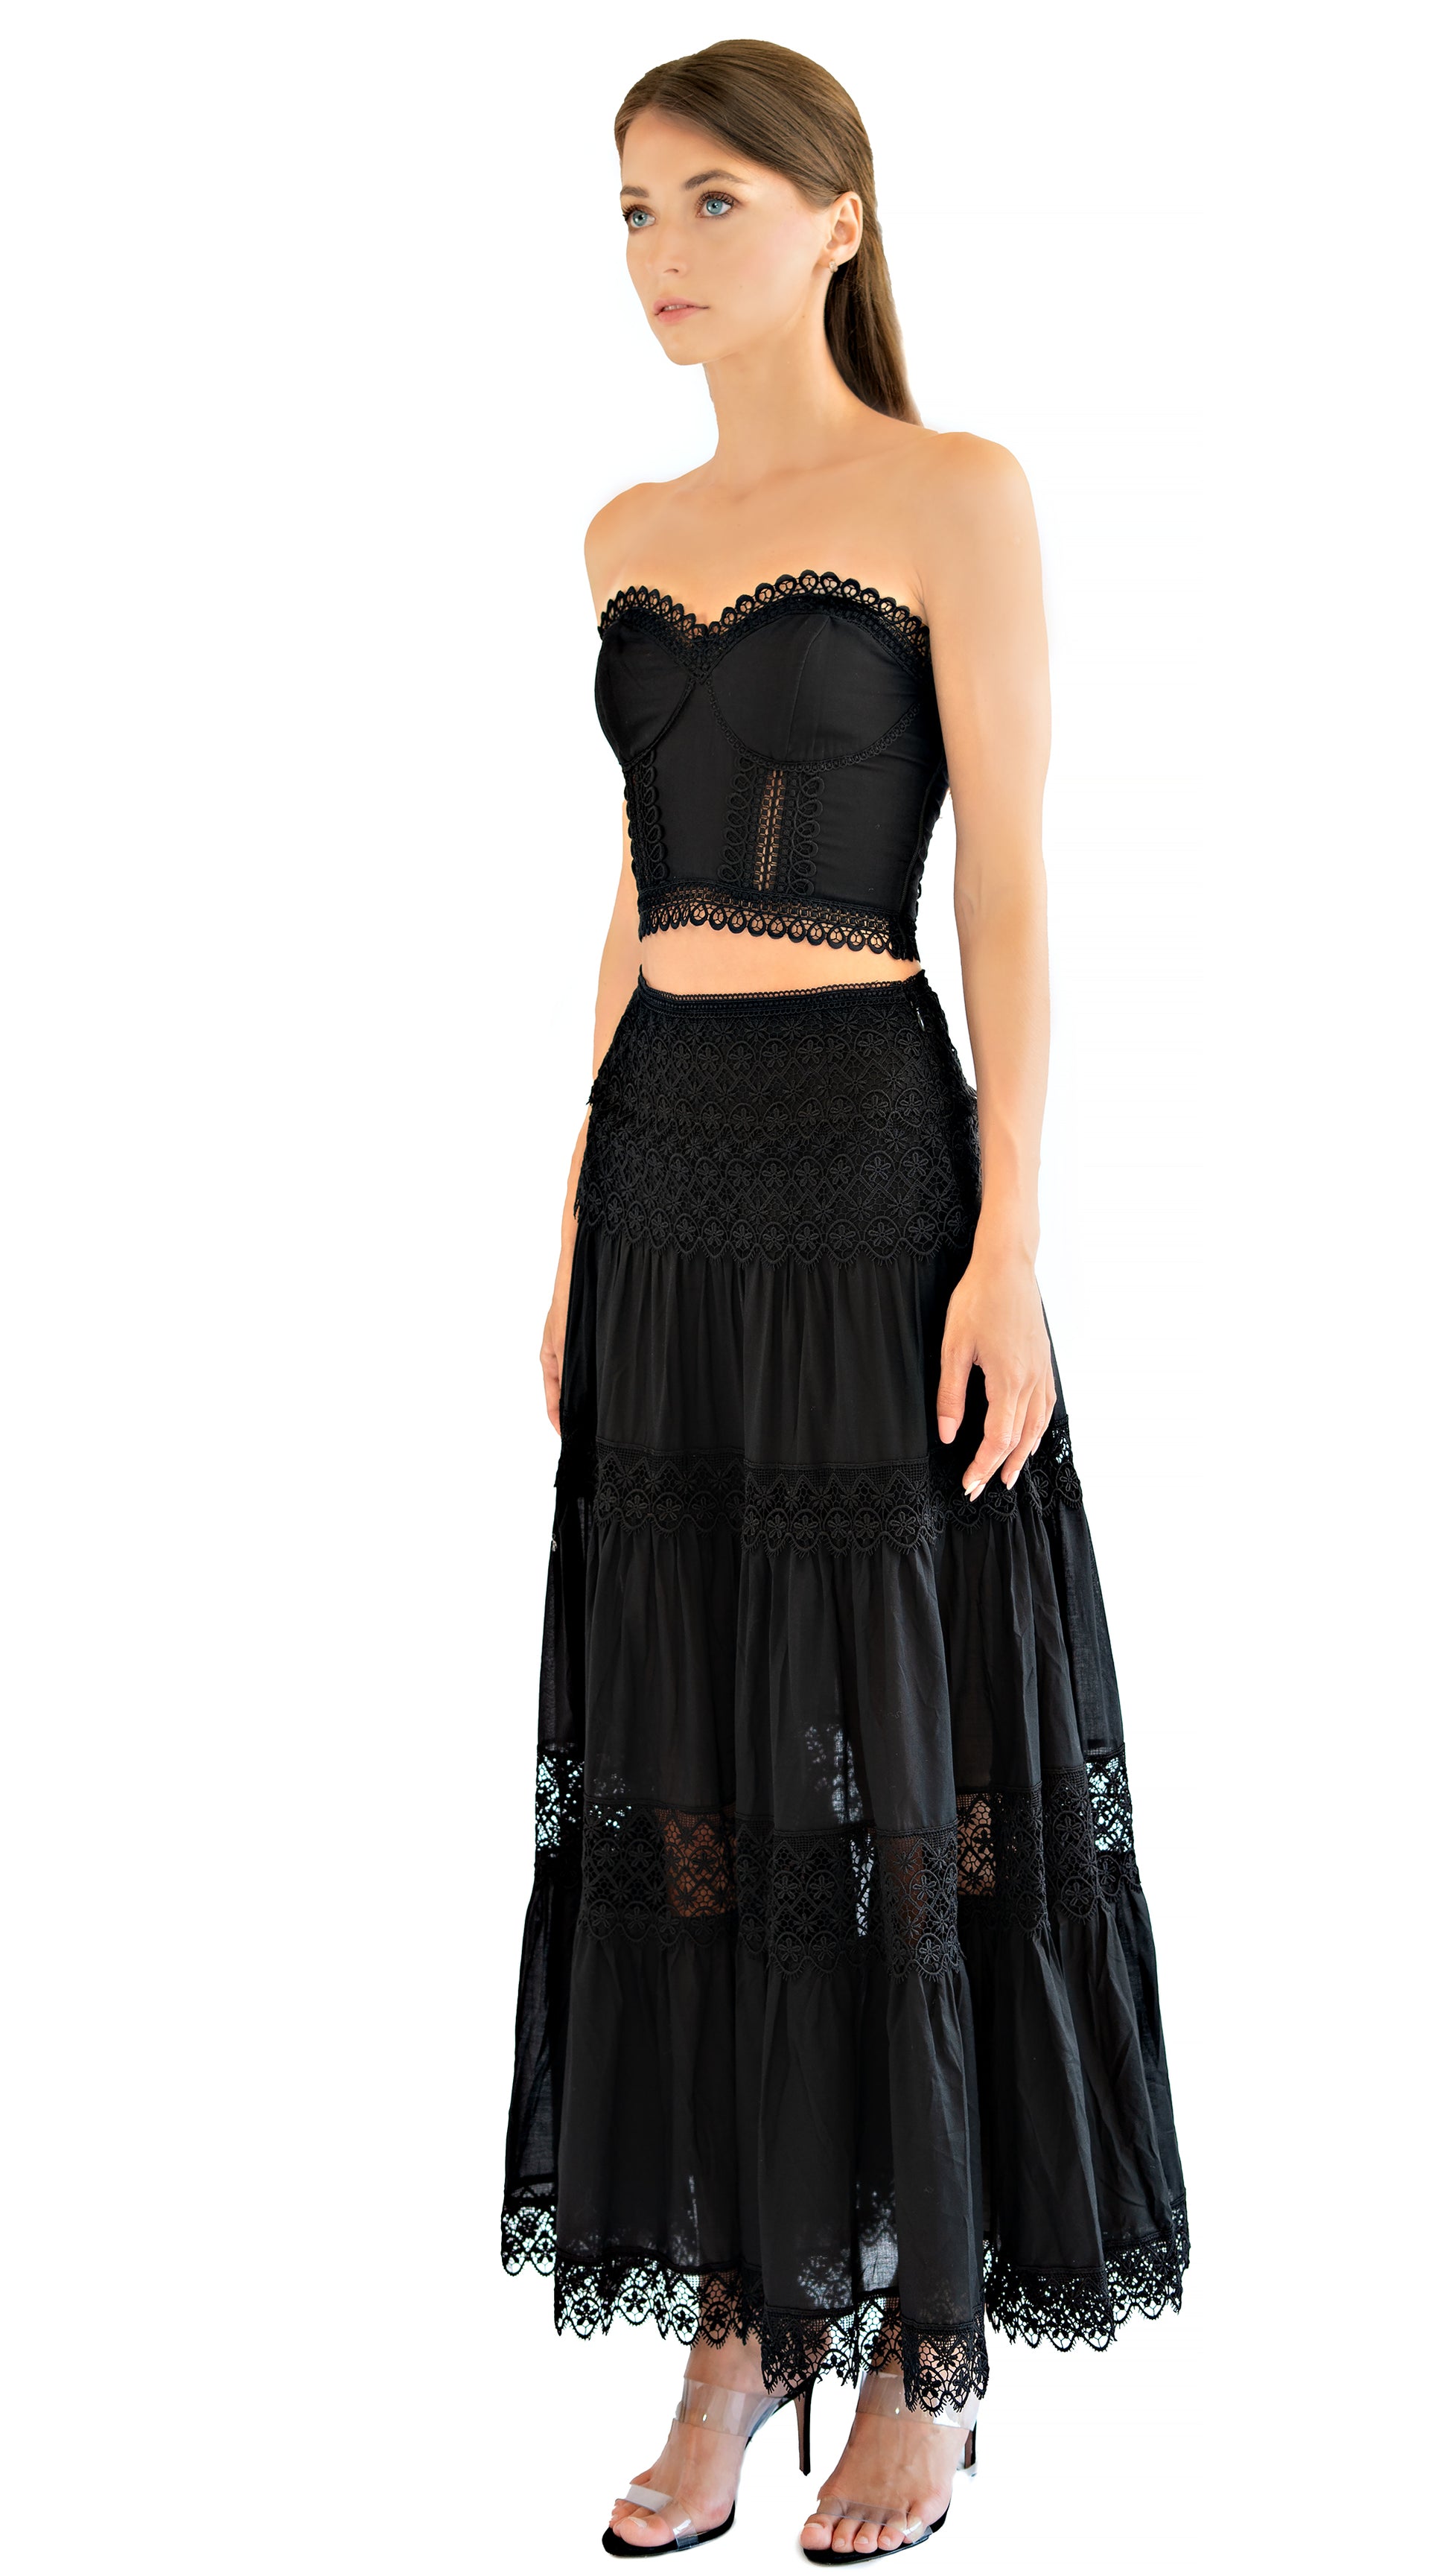 Charo Ruiz Silke long skirt with lace details in black